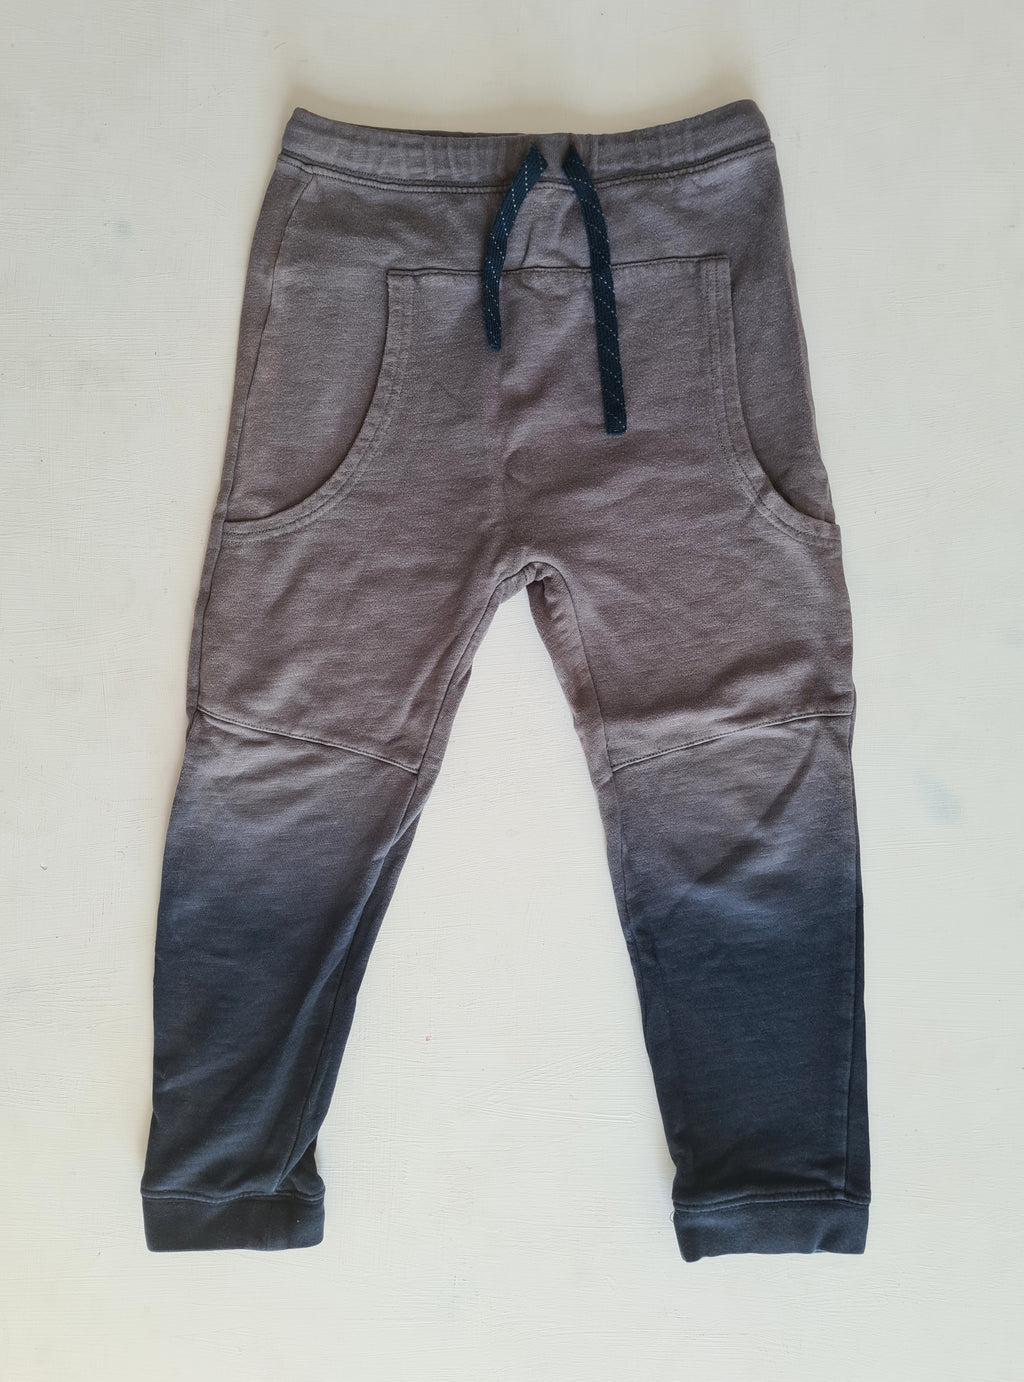 THRIFT Fred Bare - Grey and Blue trackpants Size 6